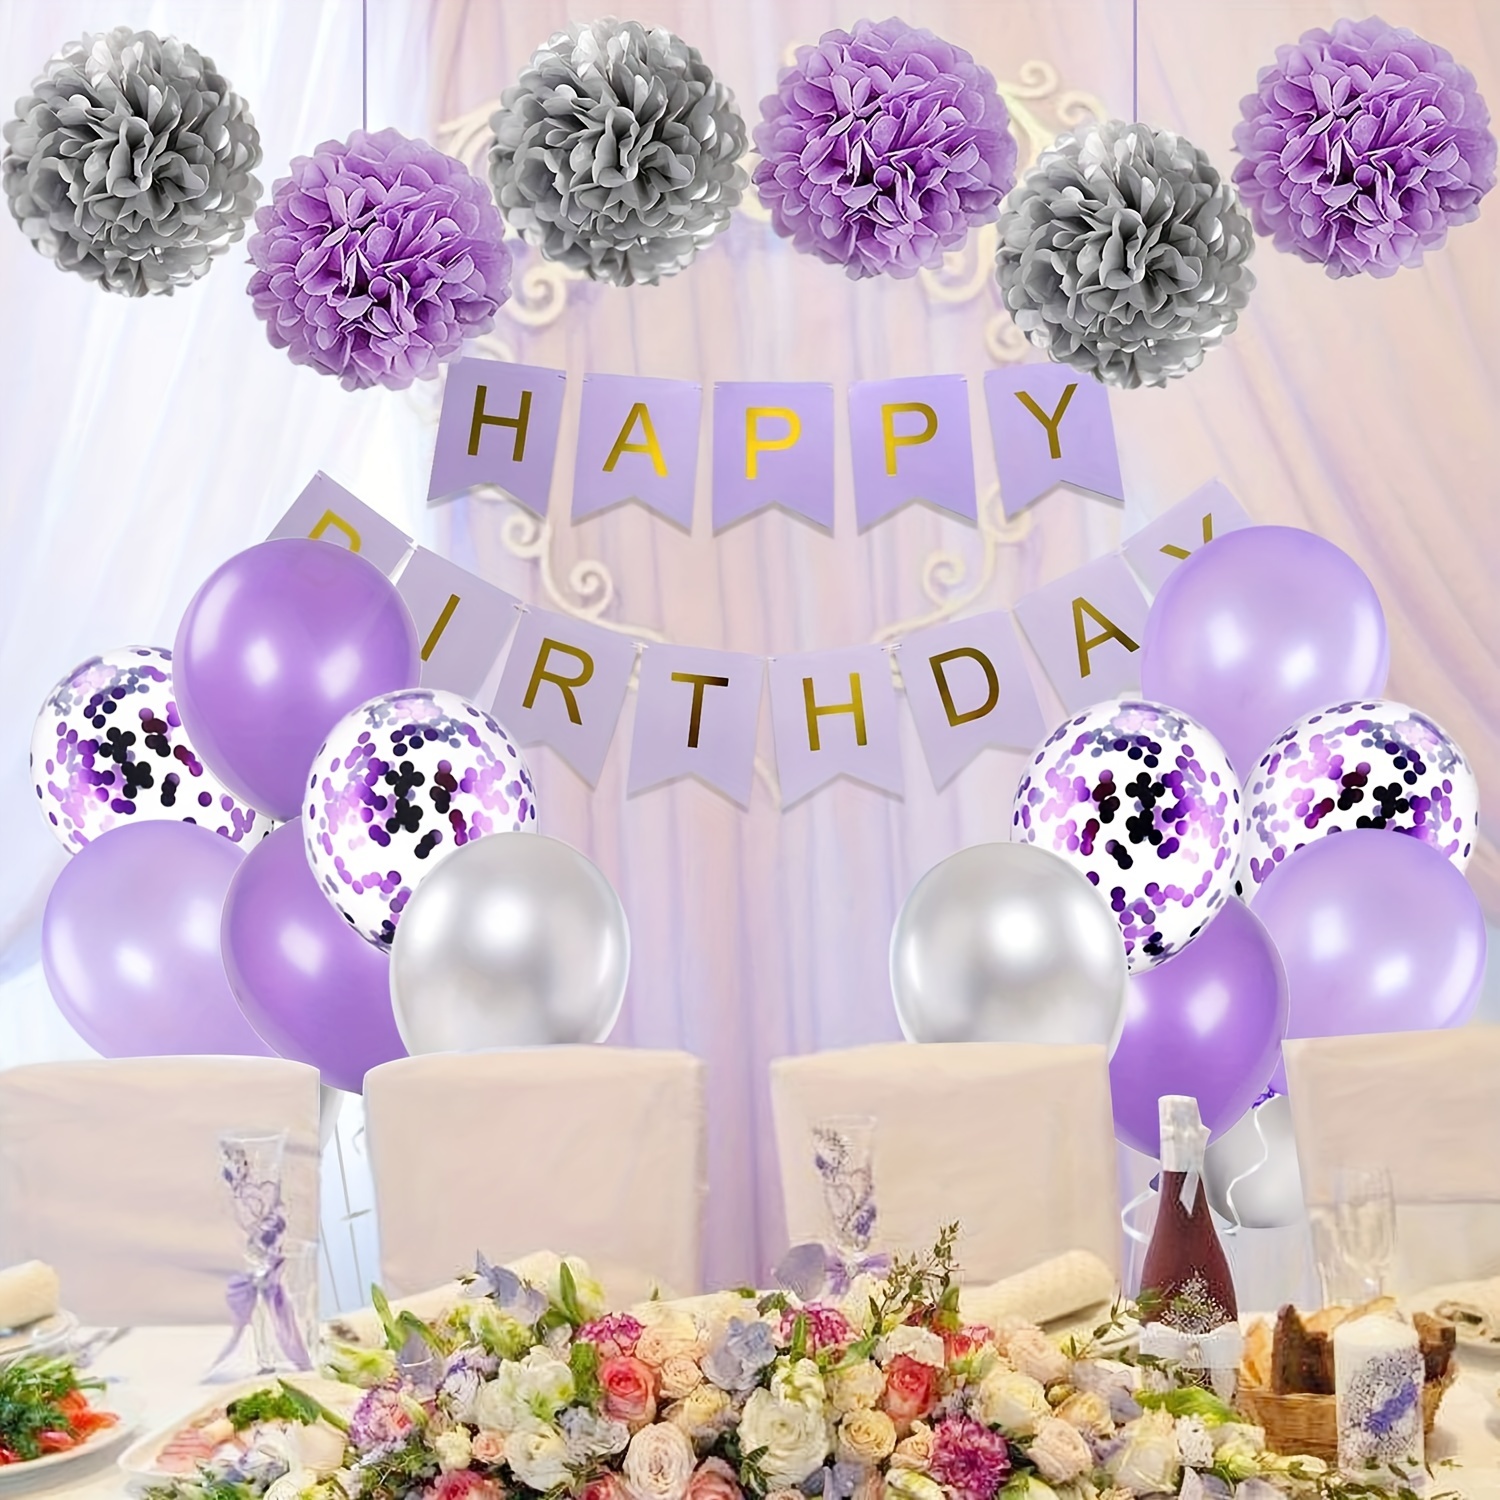 Purple Party Decorations with Happy Birthday Banner, Purple White